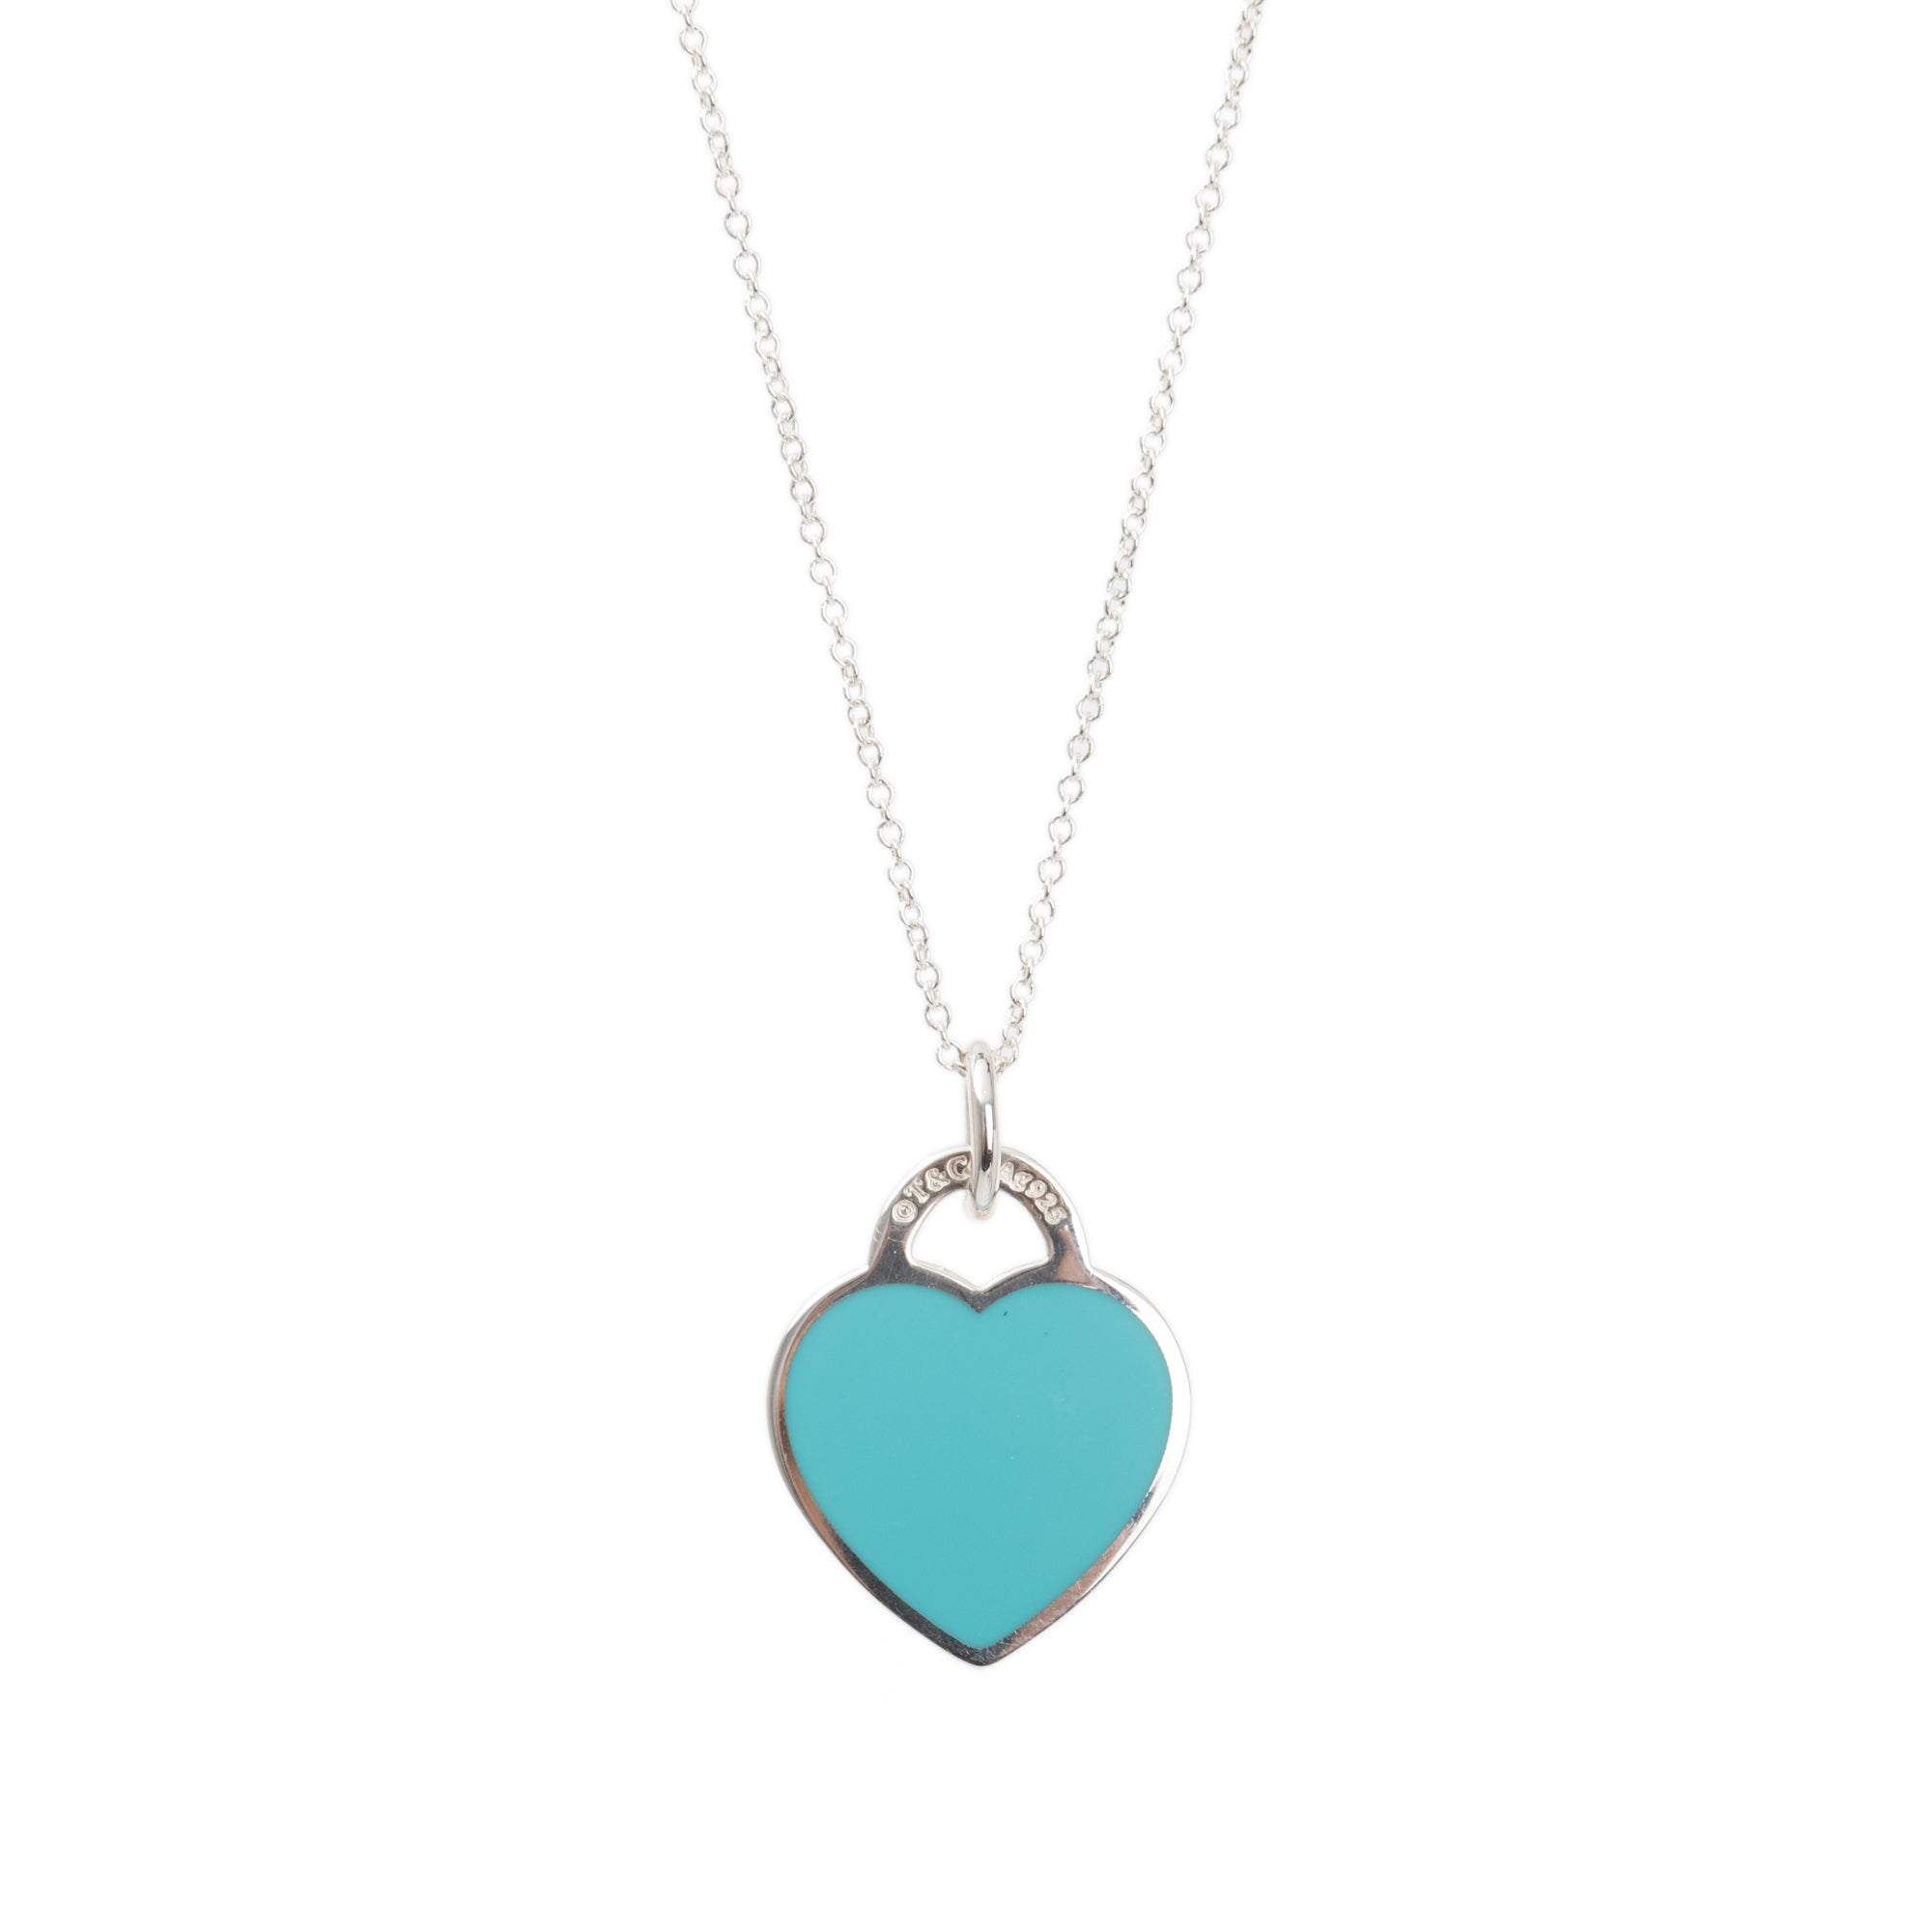 Diamond and Turquoise Heart Necklace- 